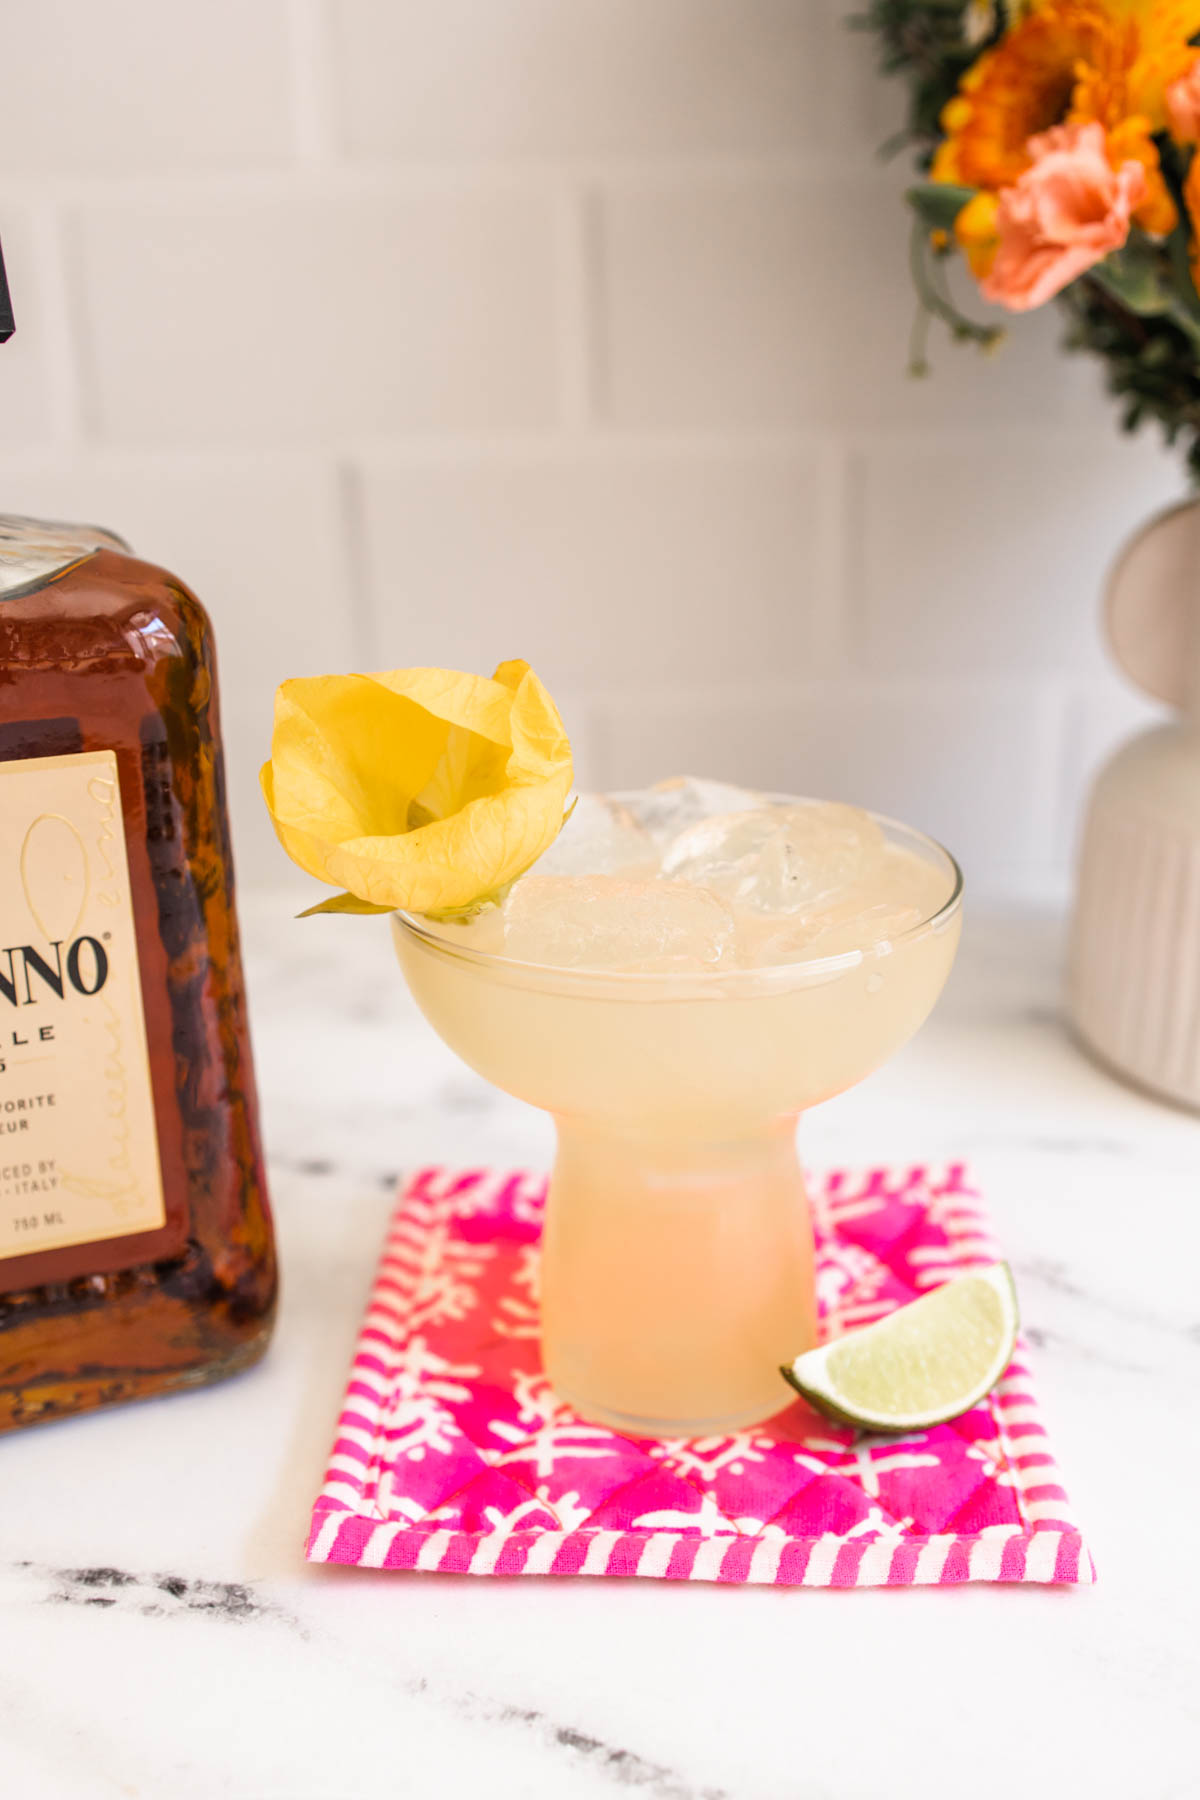 A glass of Disaronno margarita with a yellow flower garnish. in front of a Disaronno Amaretto bottle.